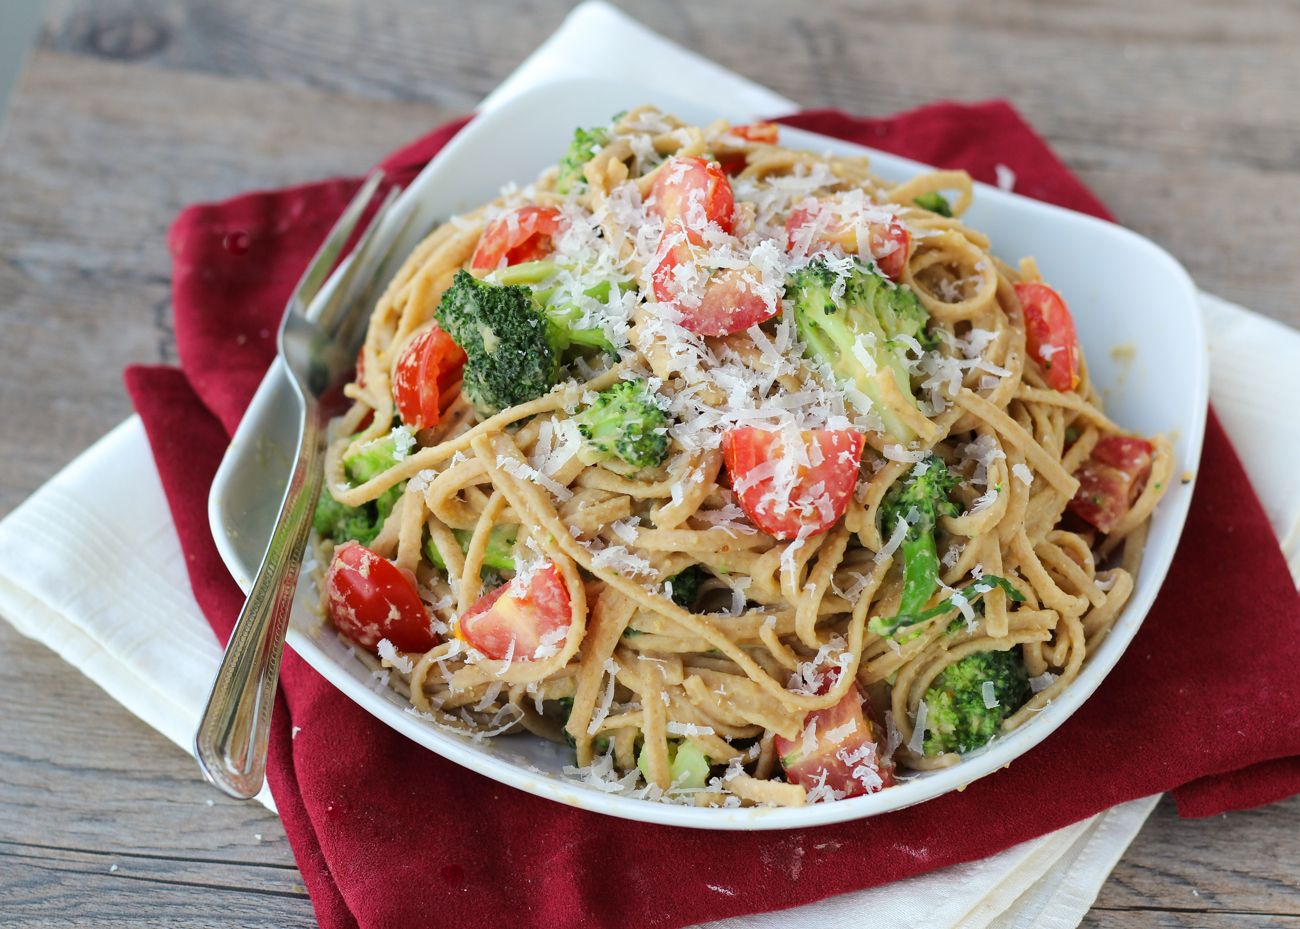 Healthy vegetarian whole wheat pasta with broccoli, tomatoes, and chickpea sauce!